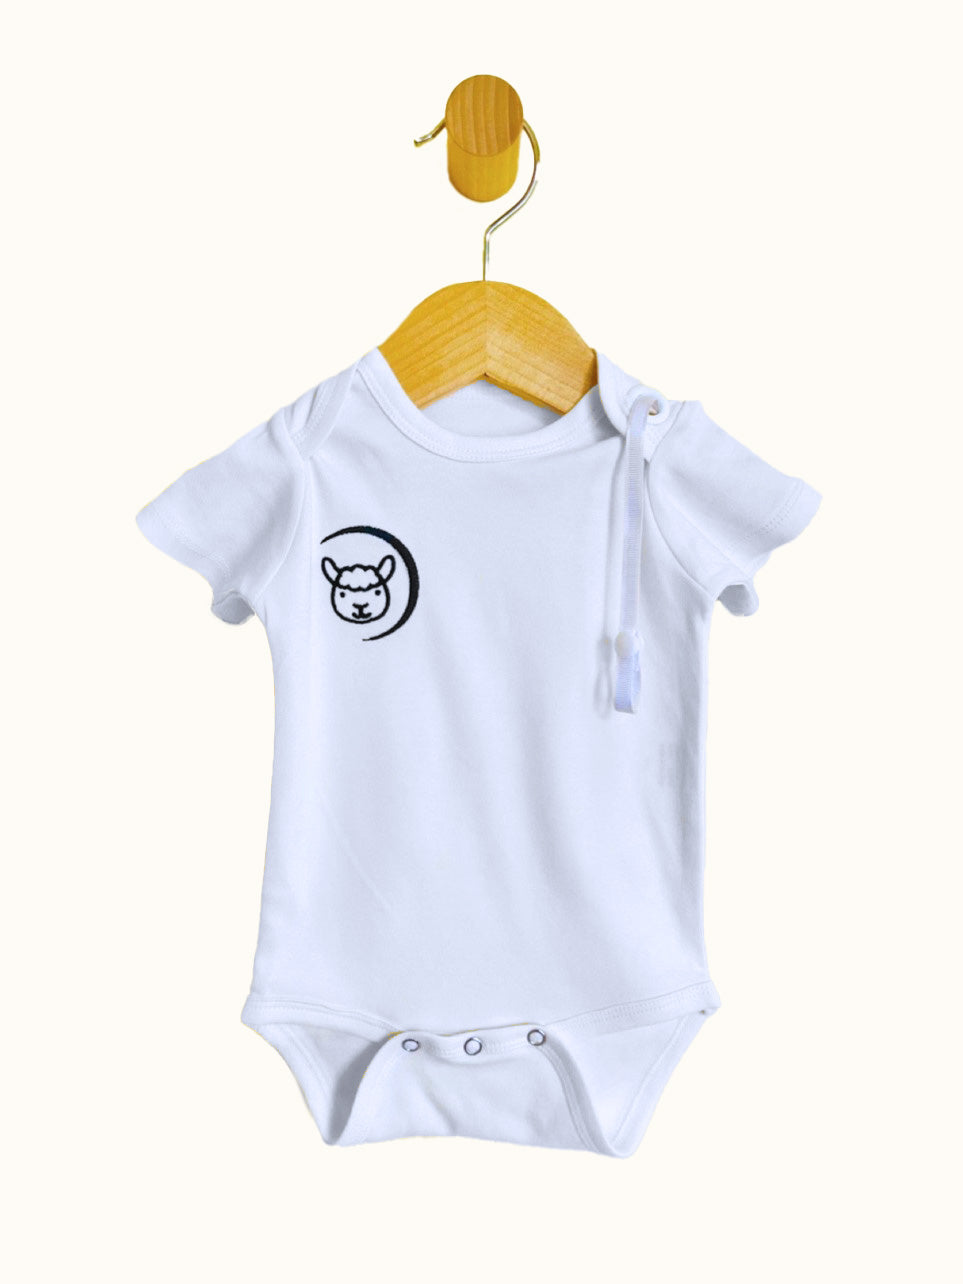 White short sleeve all natural organic fabric Baby Bodysuit with pacifier strap and snap crotch